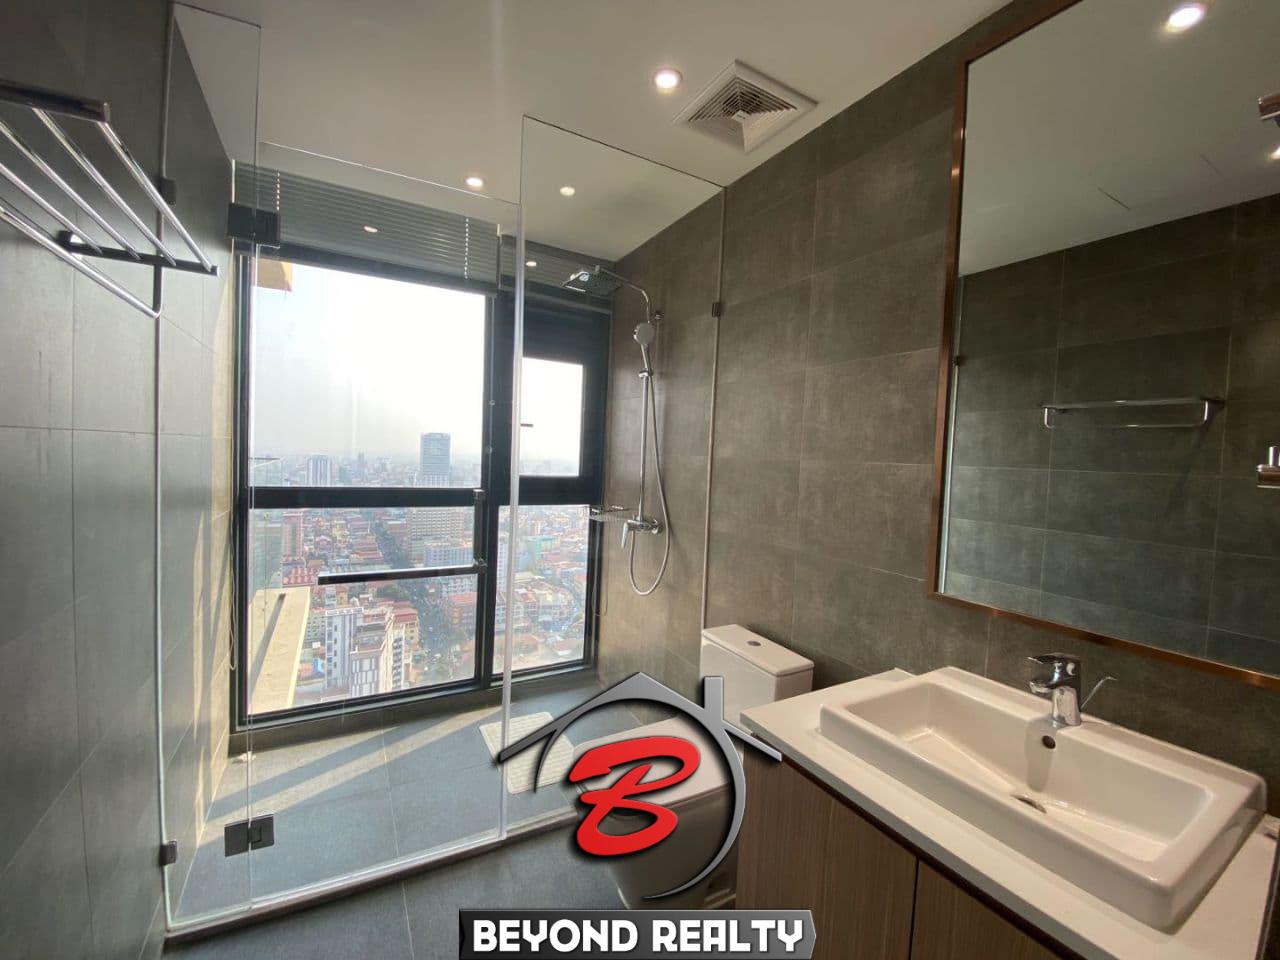 a bethroom of the 3-bedroom luxury spacious serviced flat for rent